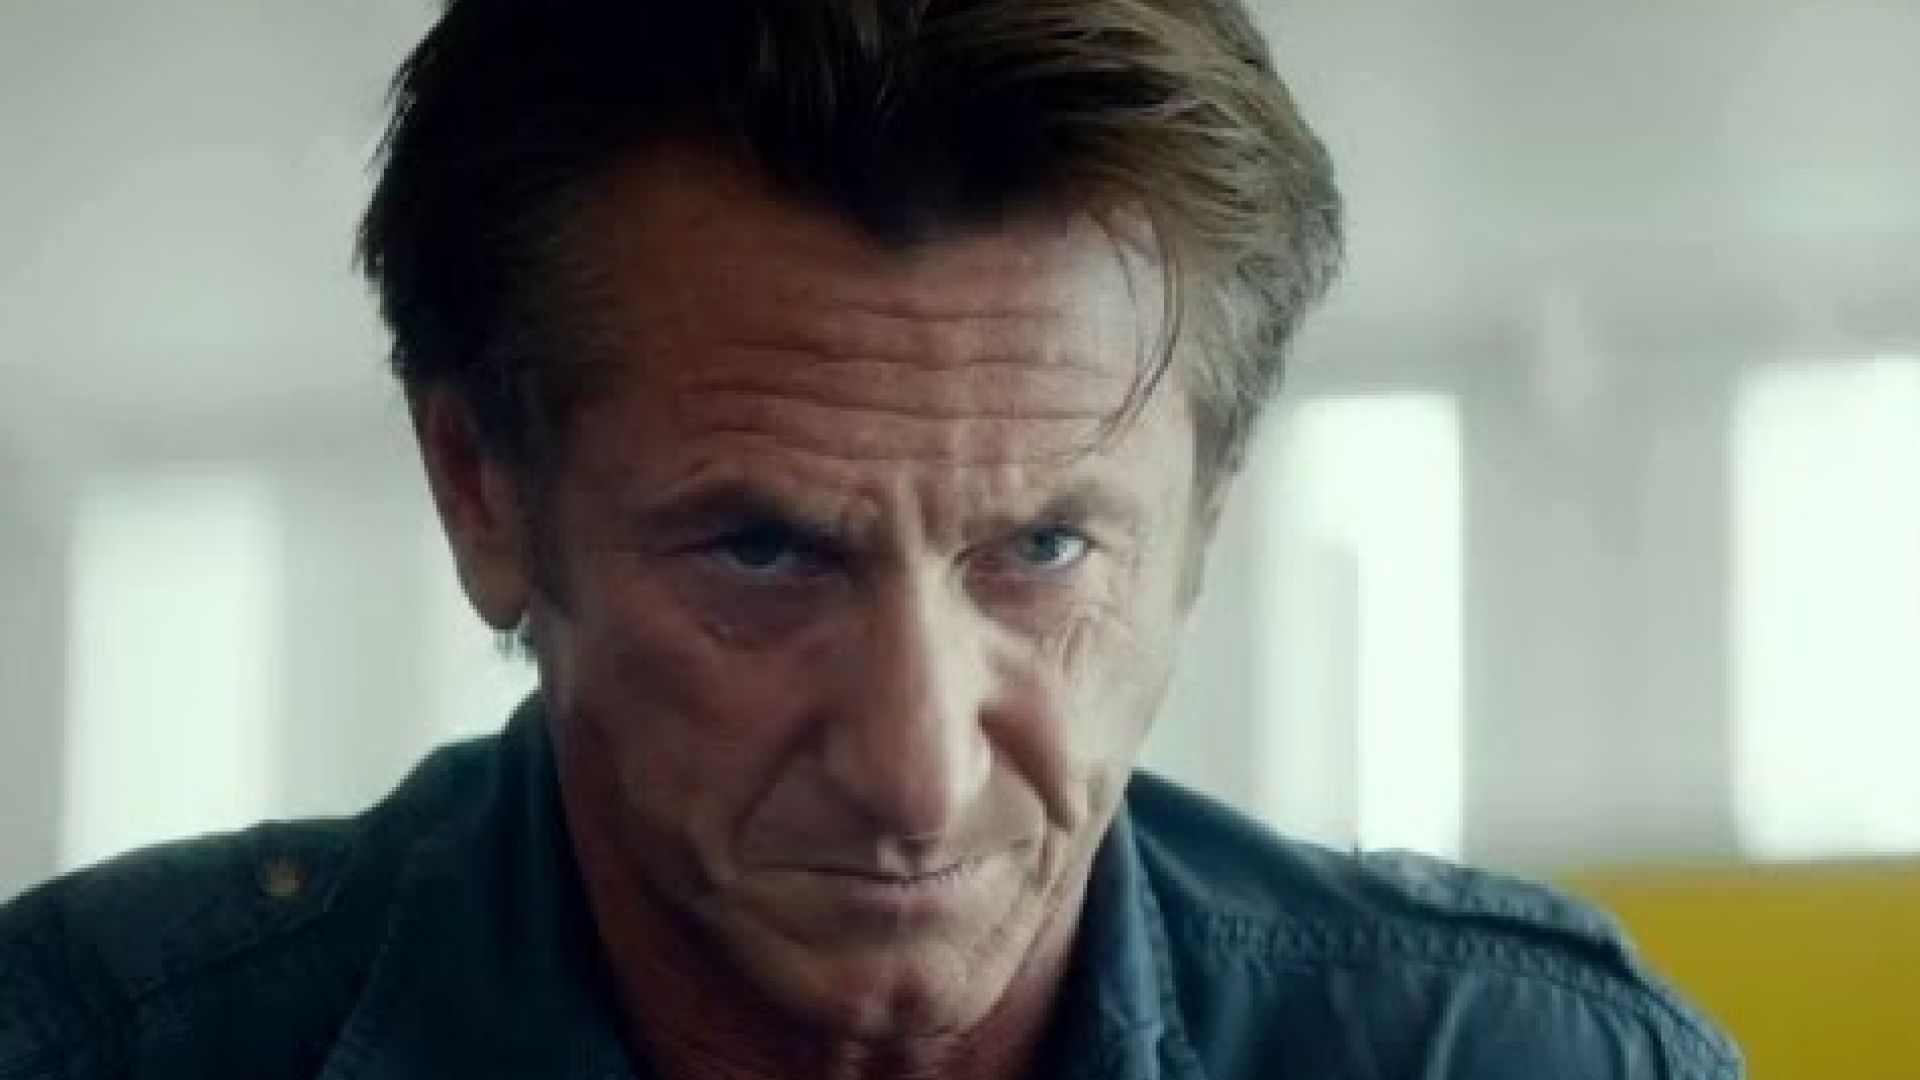 Second Official Trailer for &#039;The Gunman&#039;